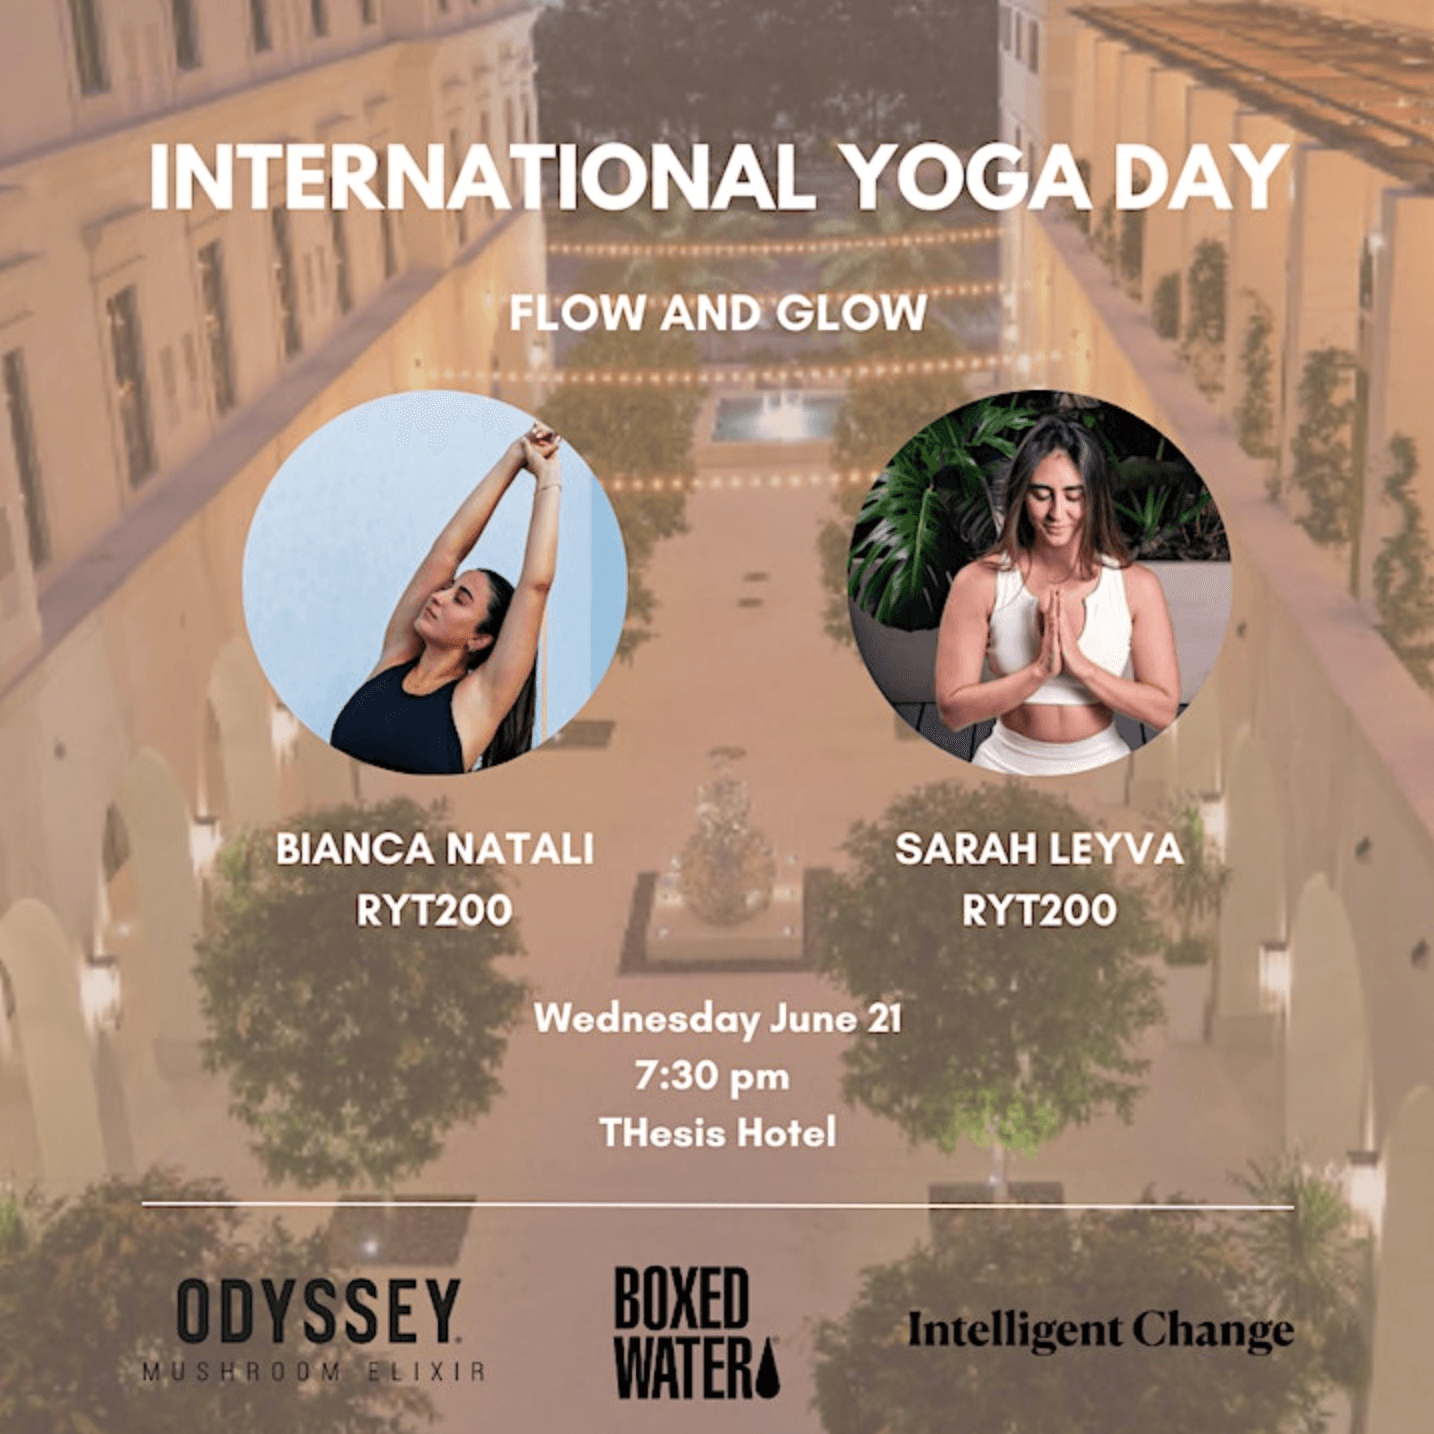 International Yoga Day Flow & Glow at THesis Hotel